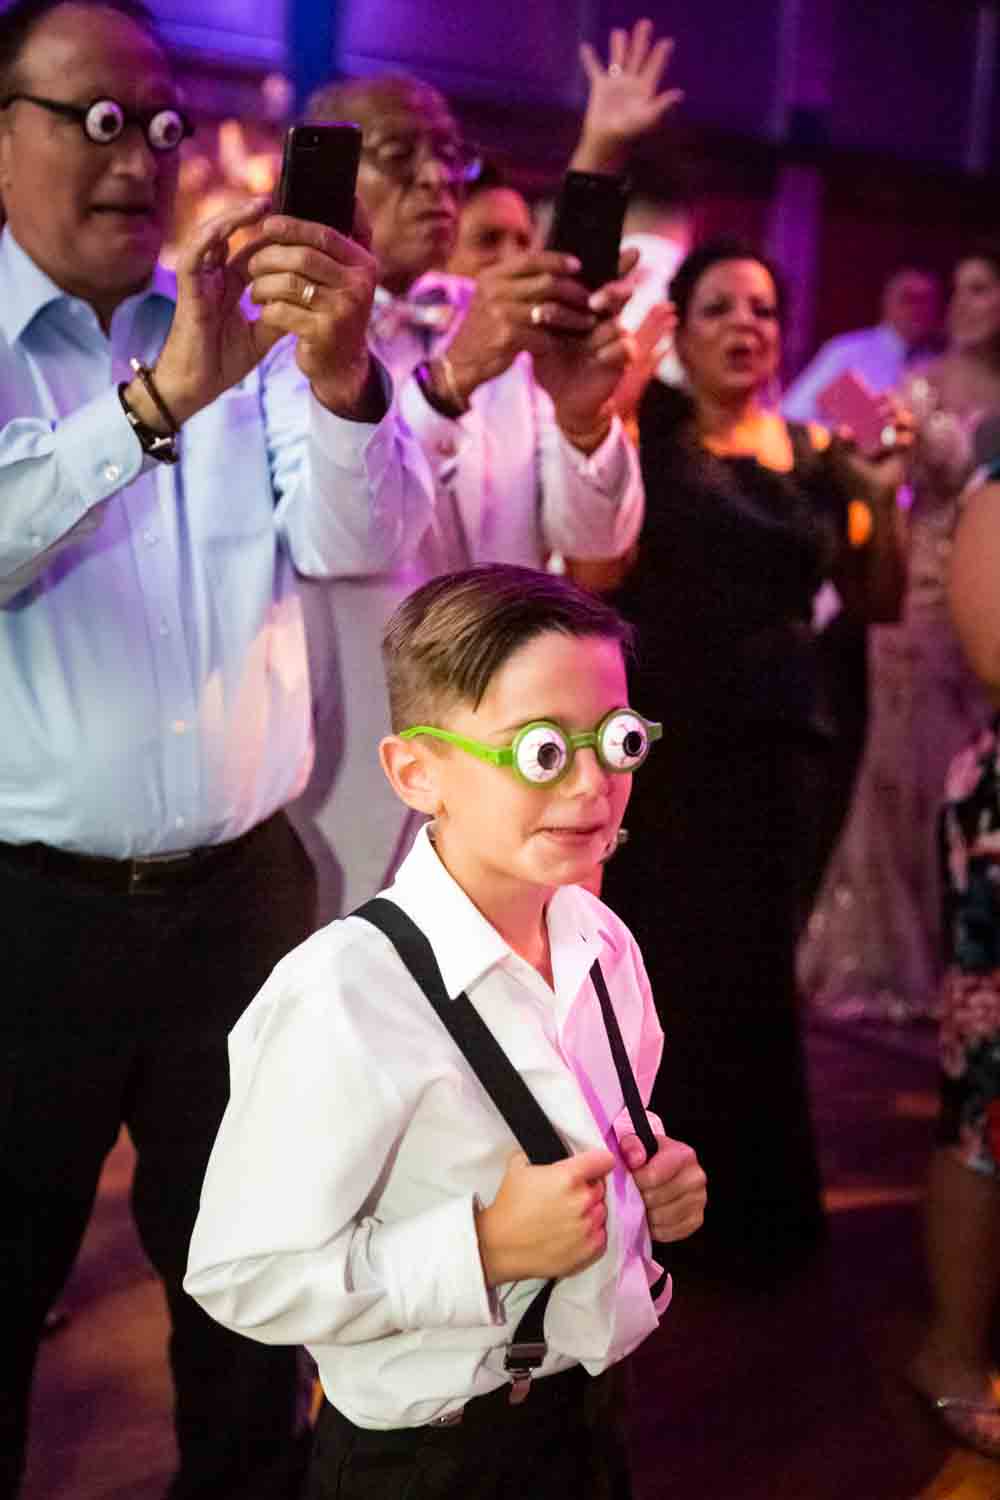 Little boy with fake eye glasses for an article on Bronx Zoo wedding venue updates